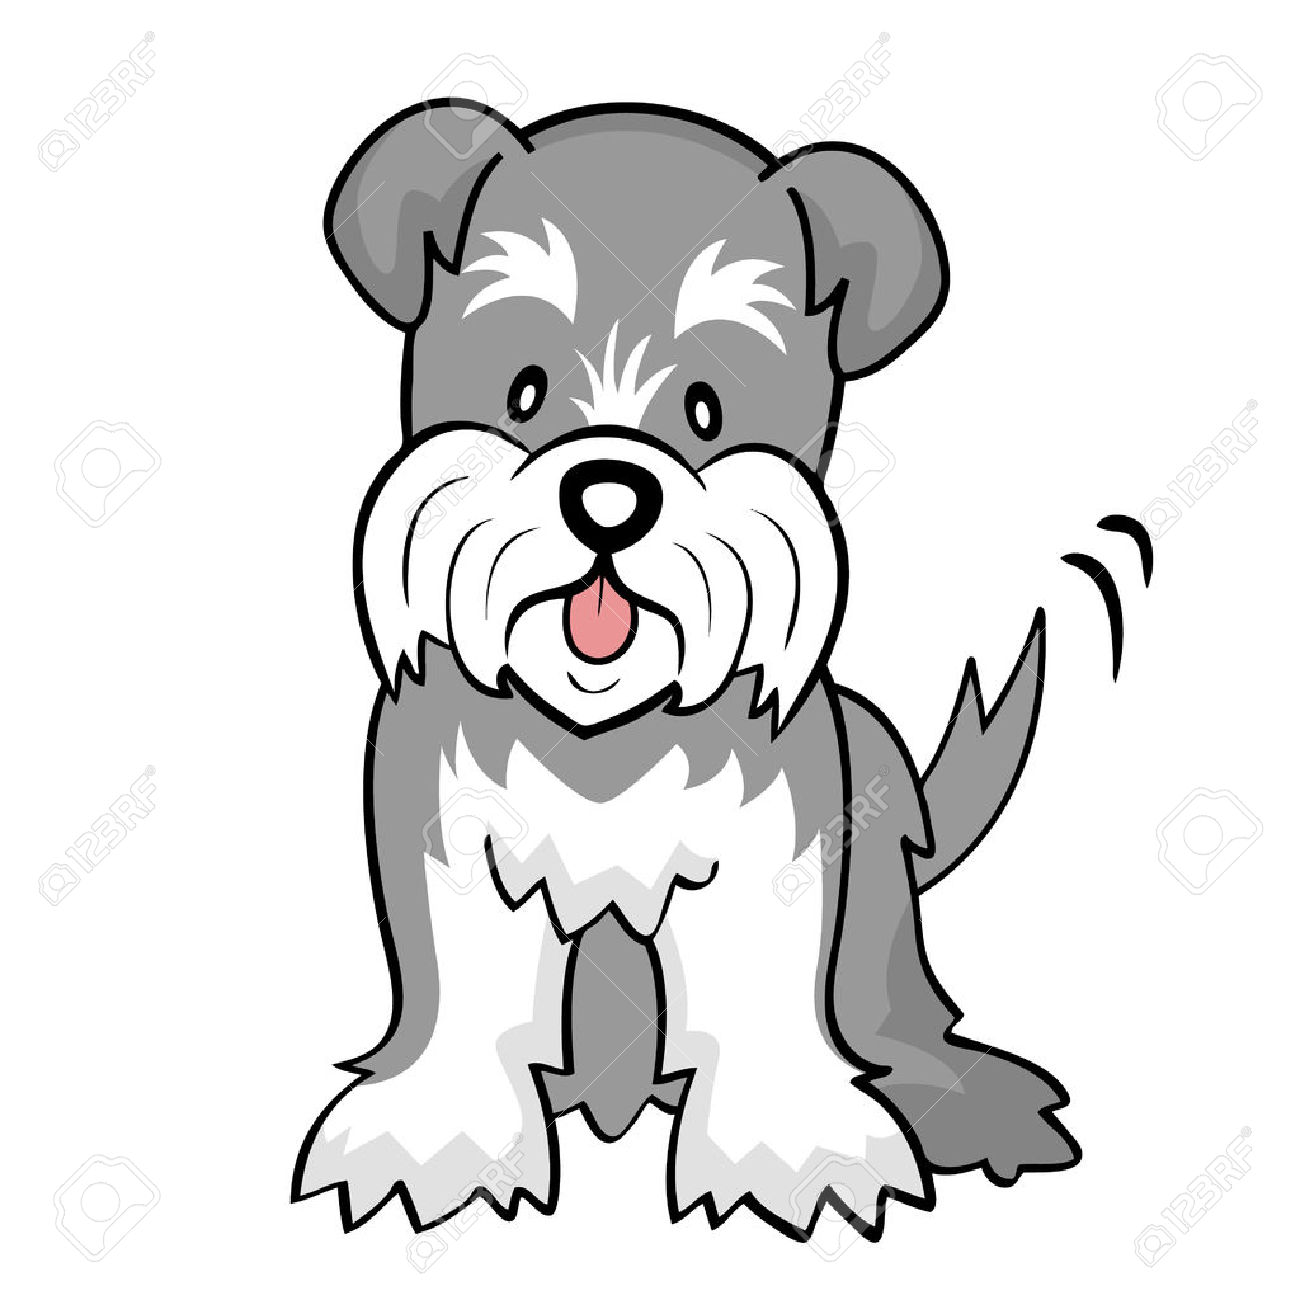 490 Schnauzer Stock Illustrations, Cliparts And Royalty Free.